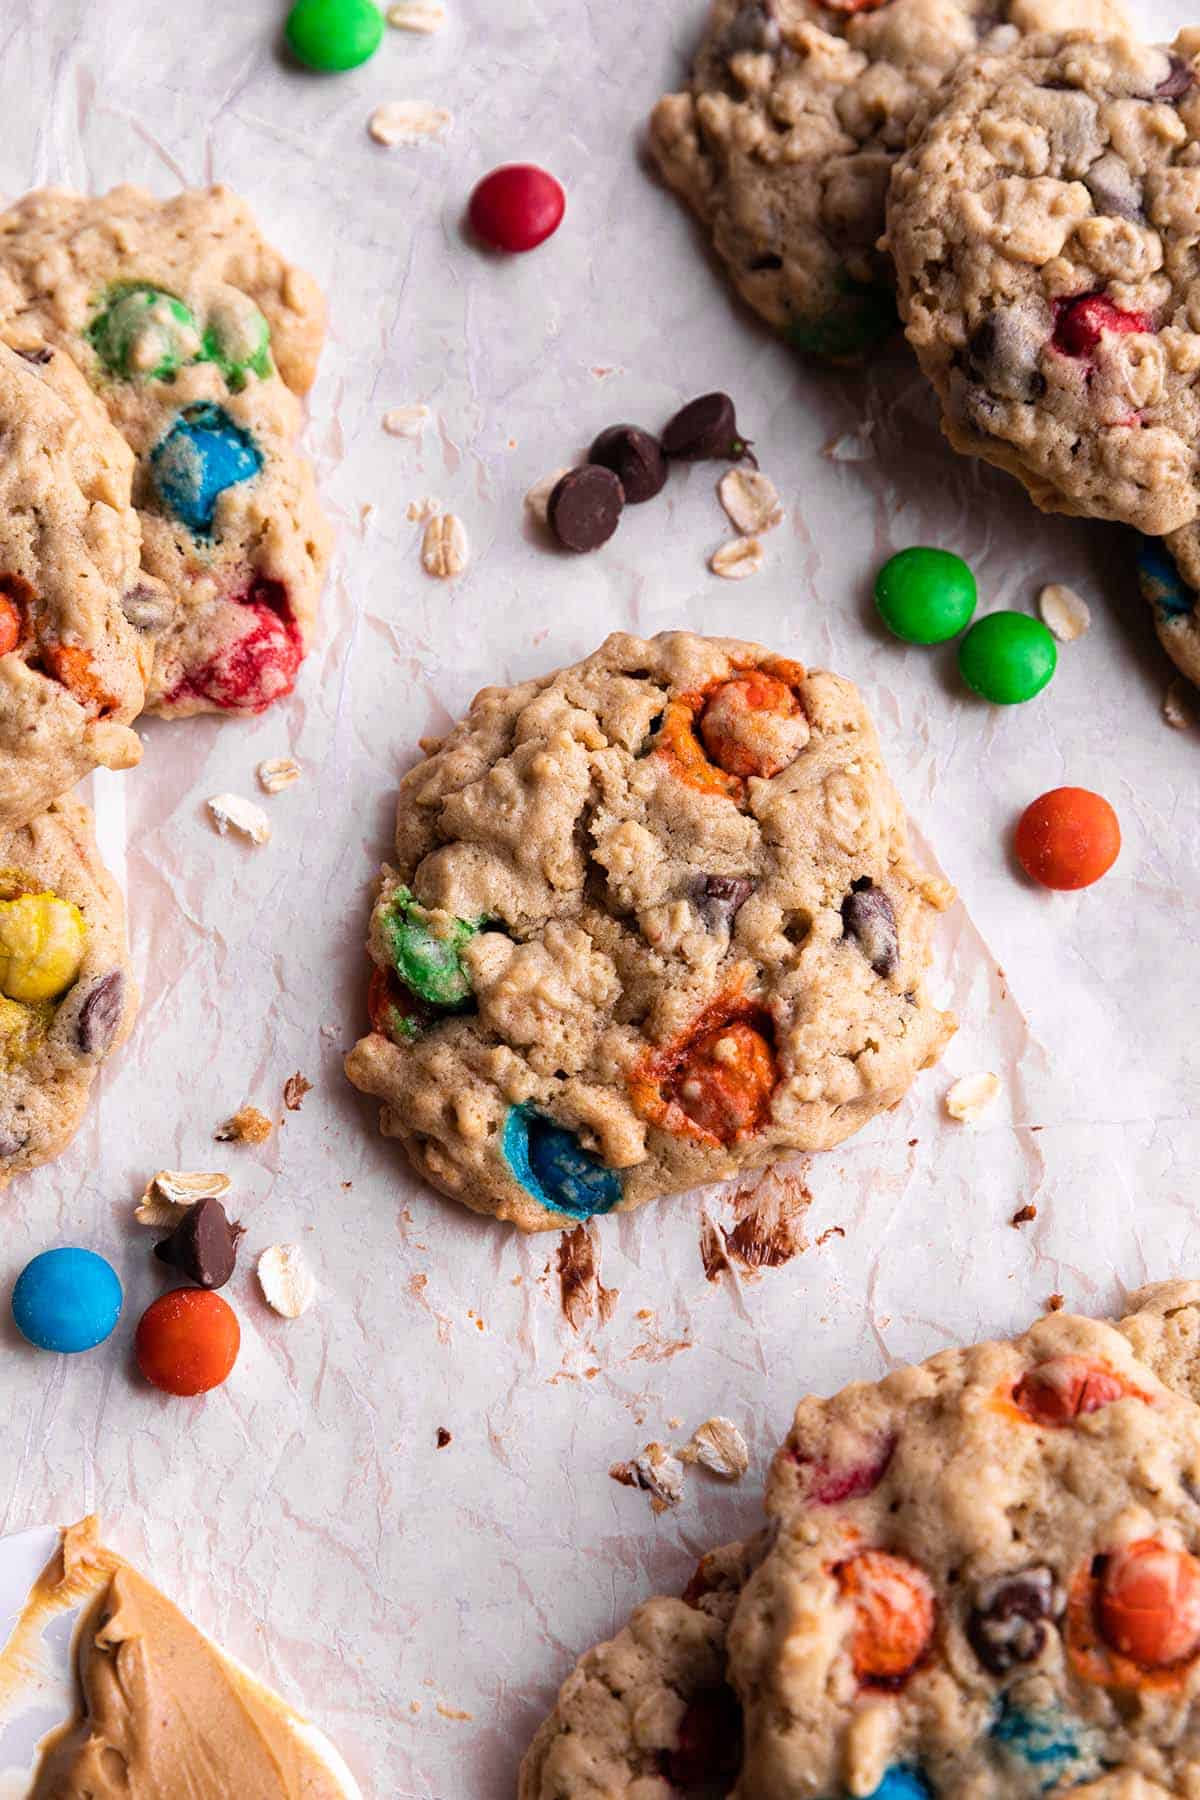 Cookies with oats, m&m's, chocoalte chips on parchment paper.